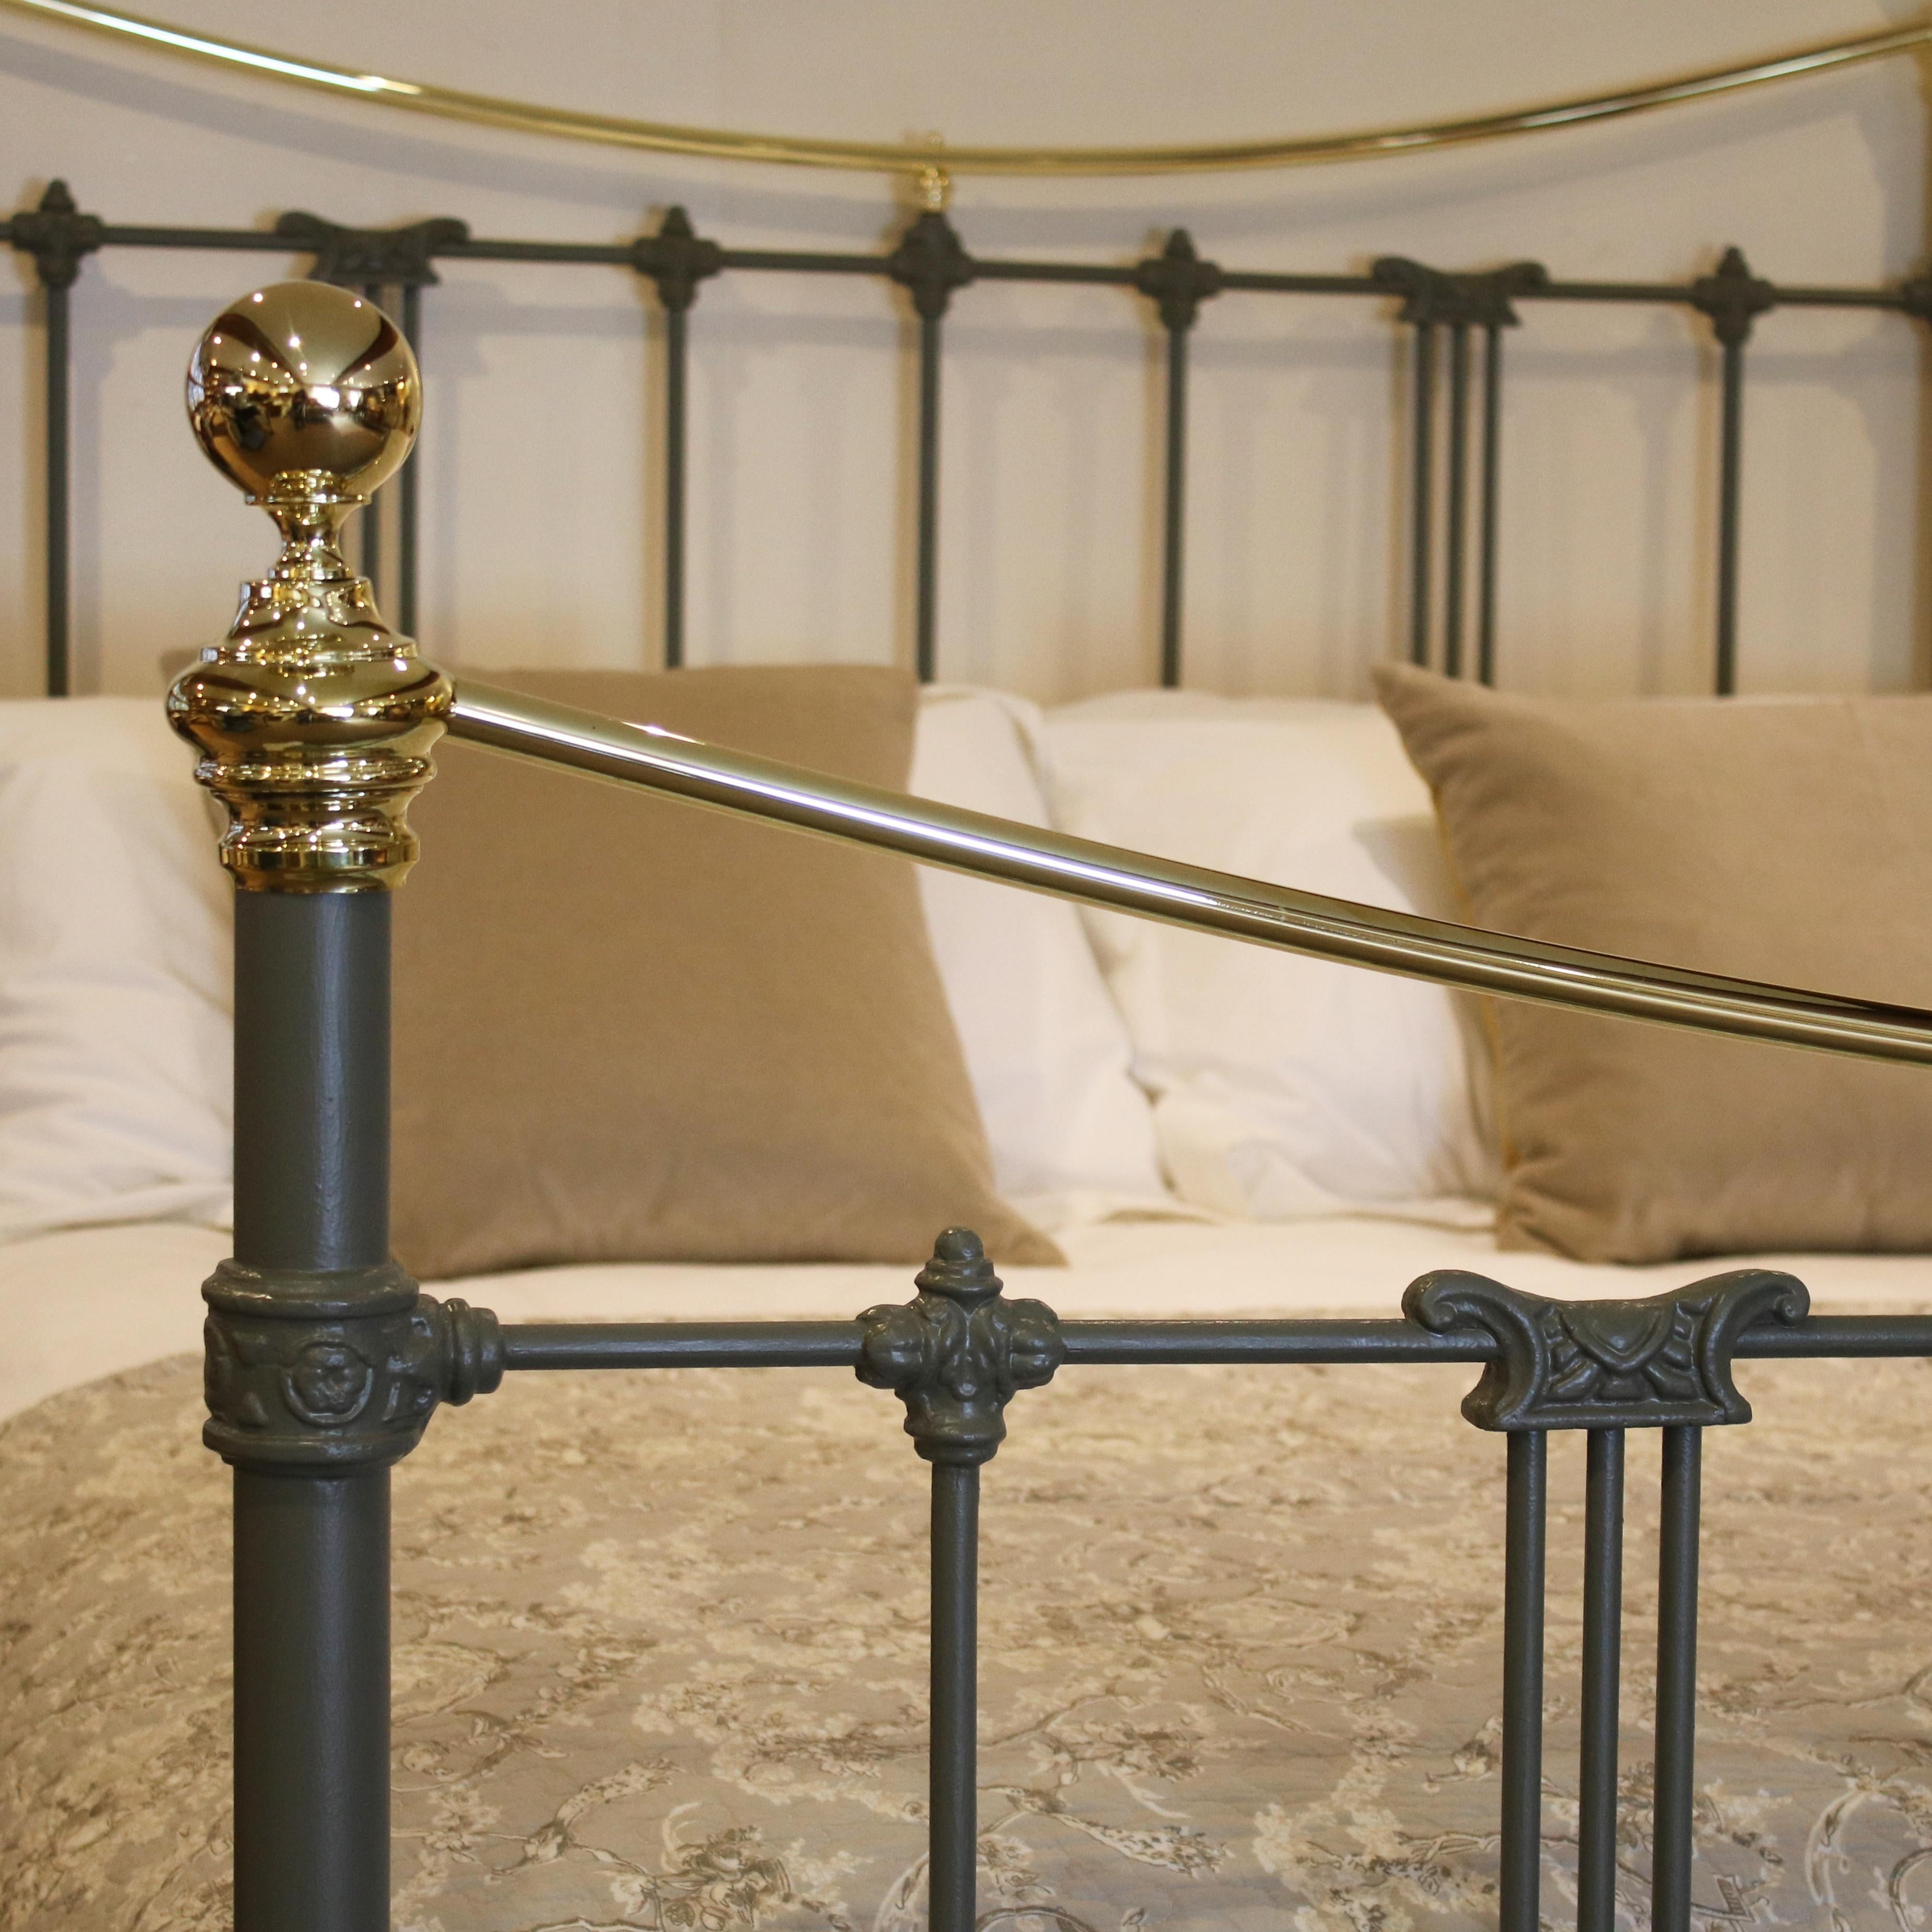 green iron bed